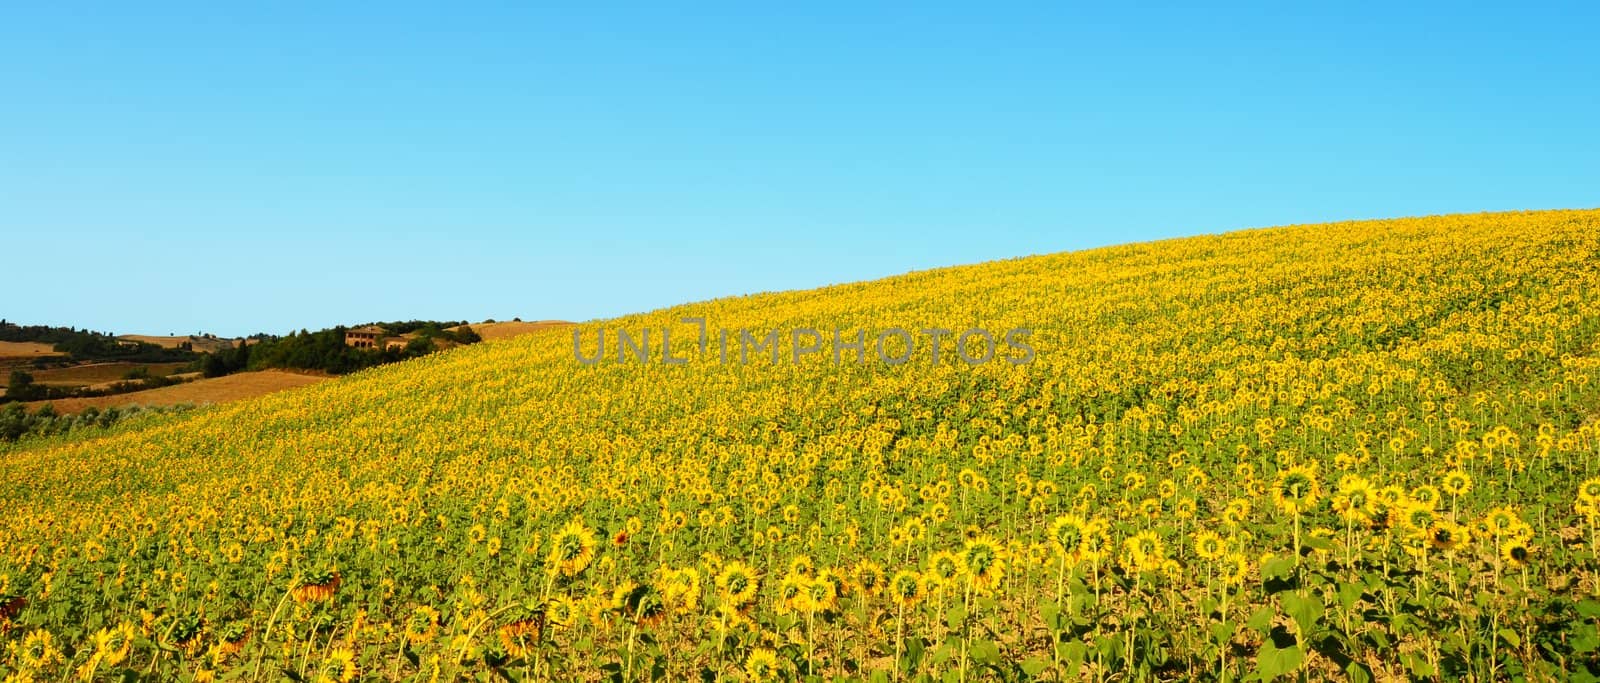 Hill In Tuscany, Covered With The Golden Sunflowers